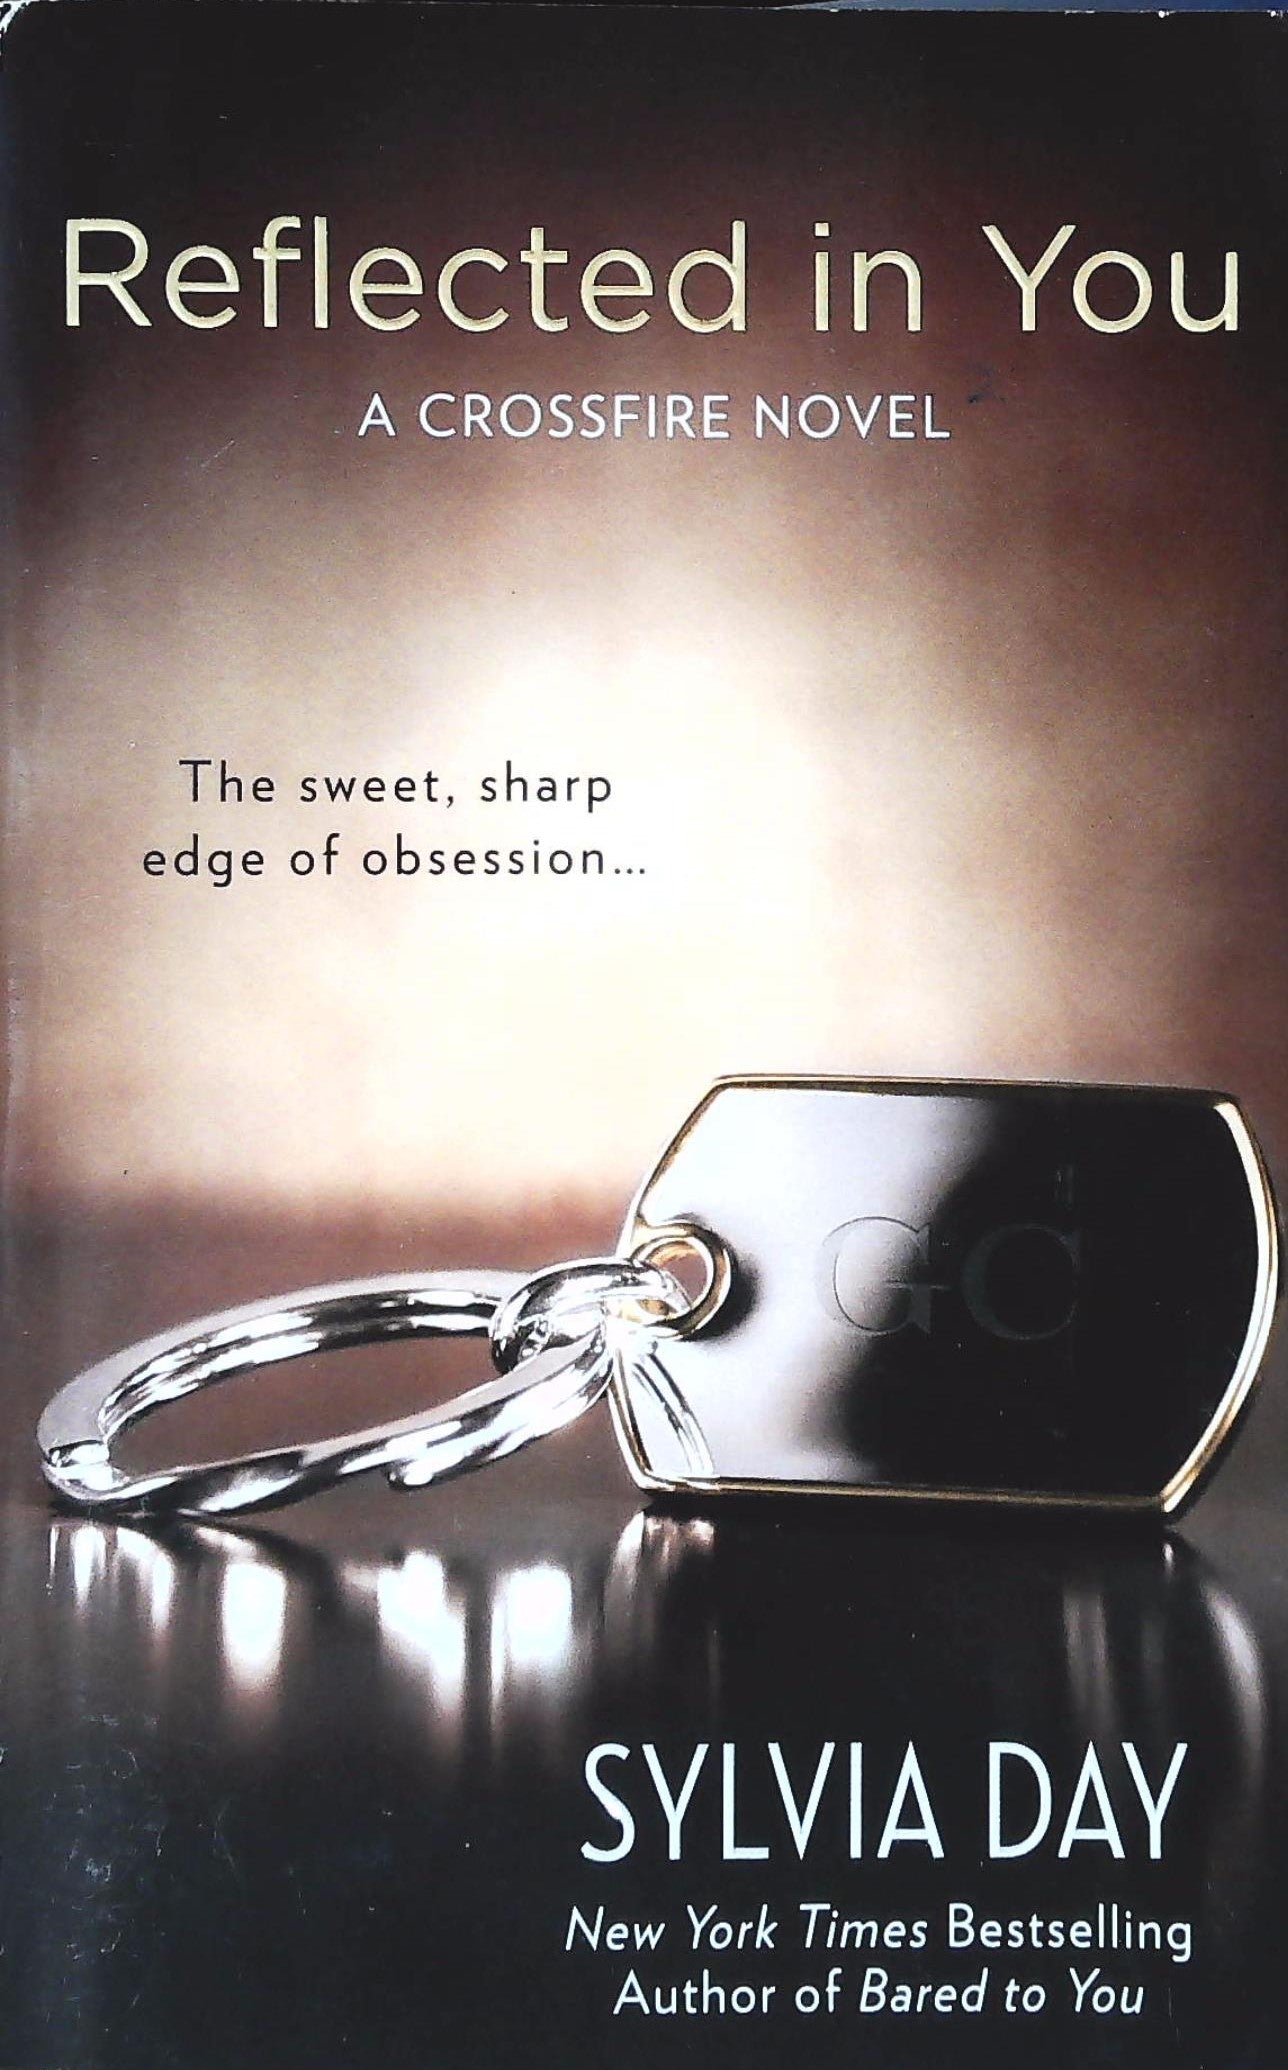 Livre ISBN 0425263916 Crossfire : Reflected in You (Sylvia Day)